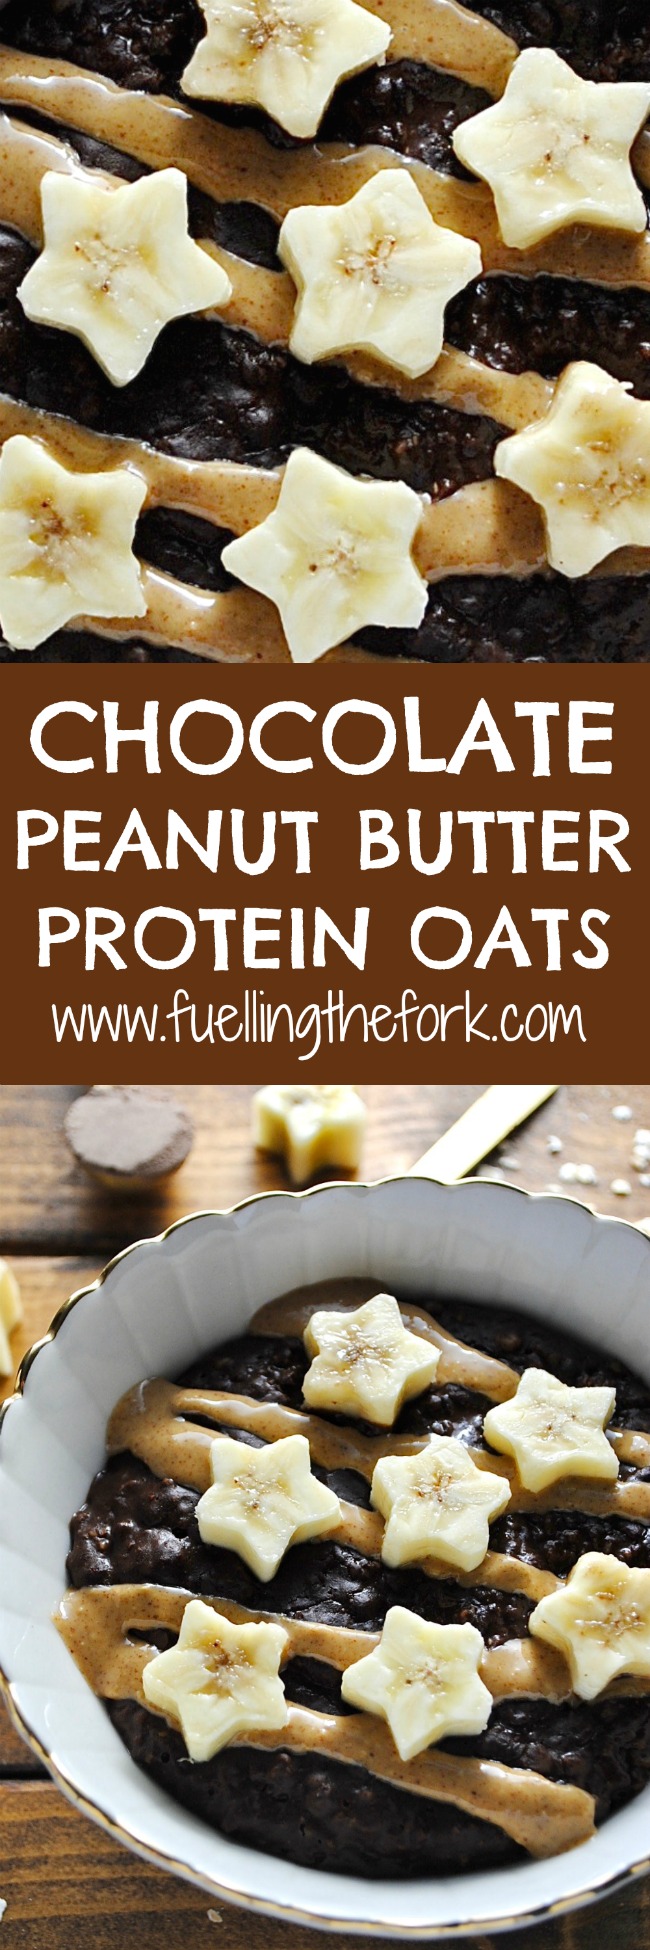 Chocolate Peanut Butter Protein Oats